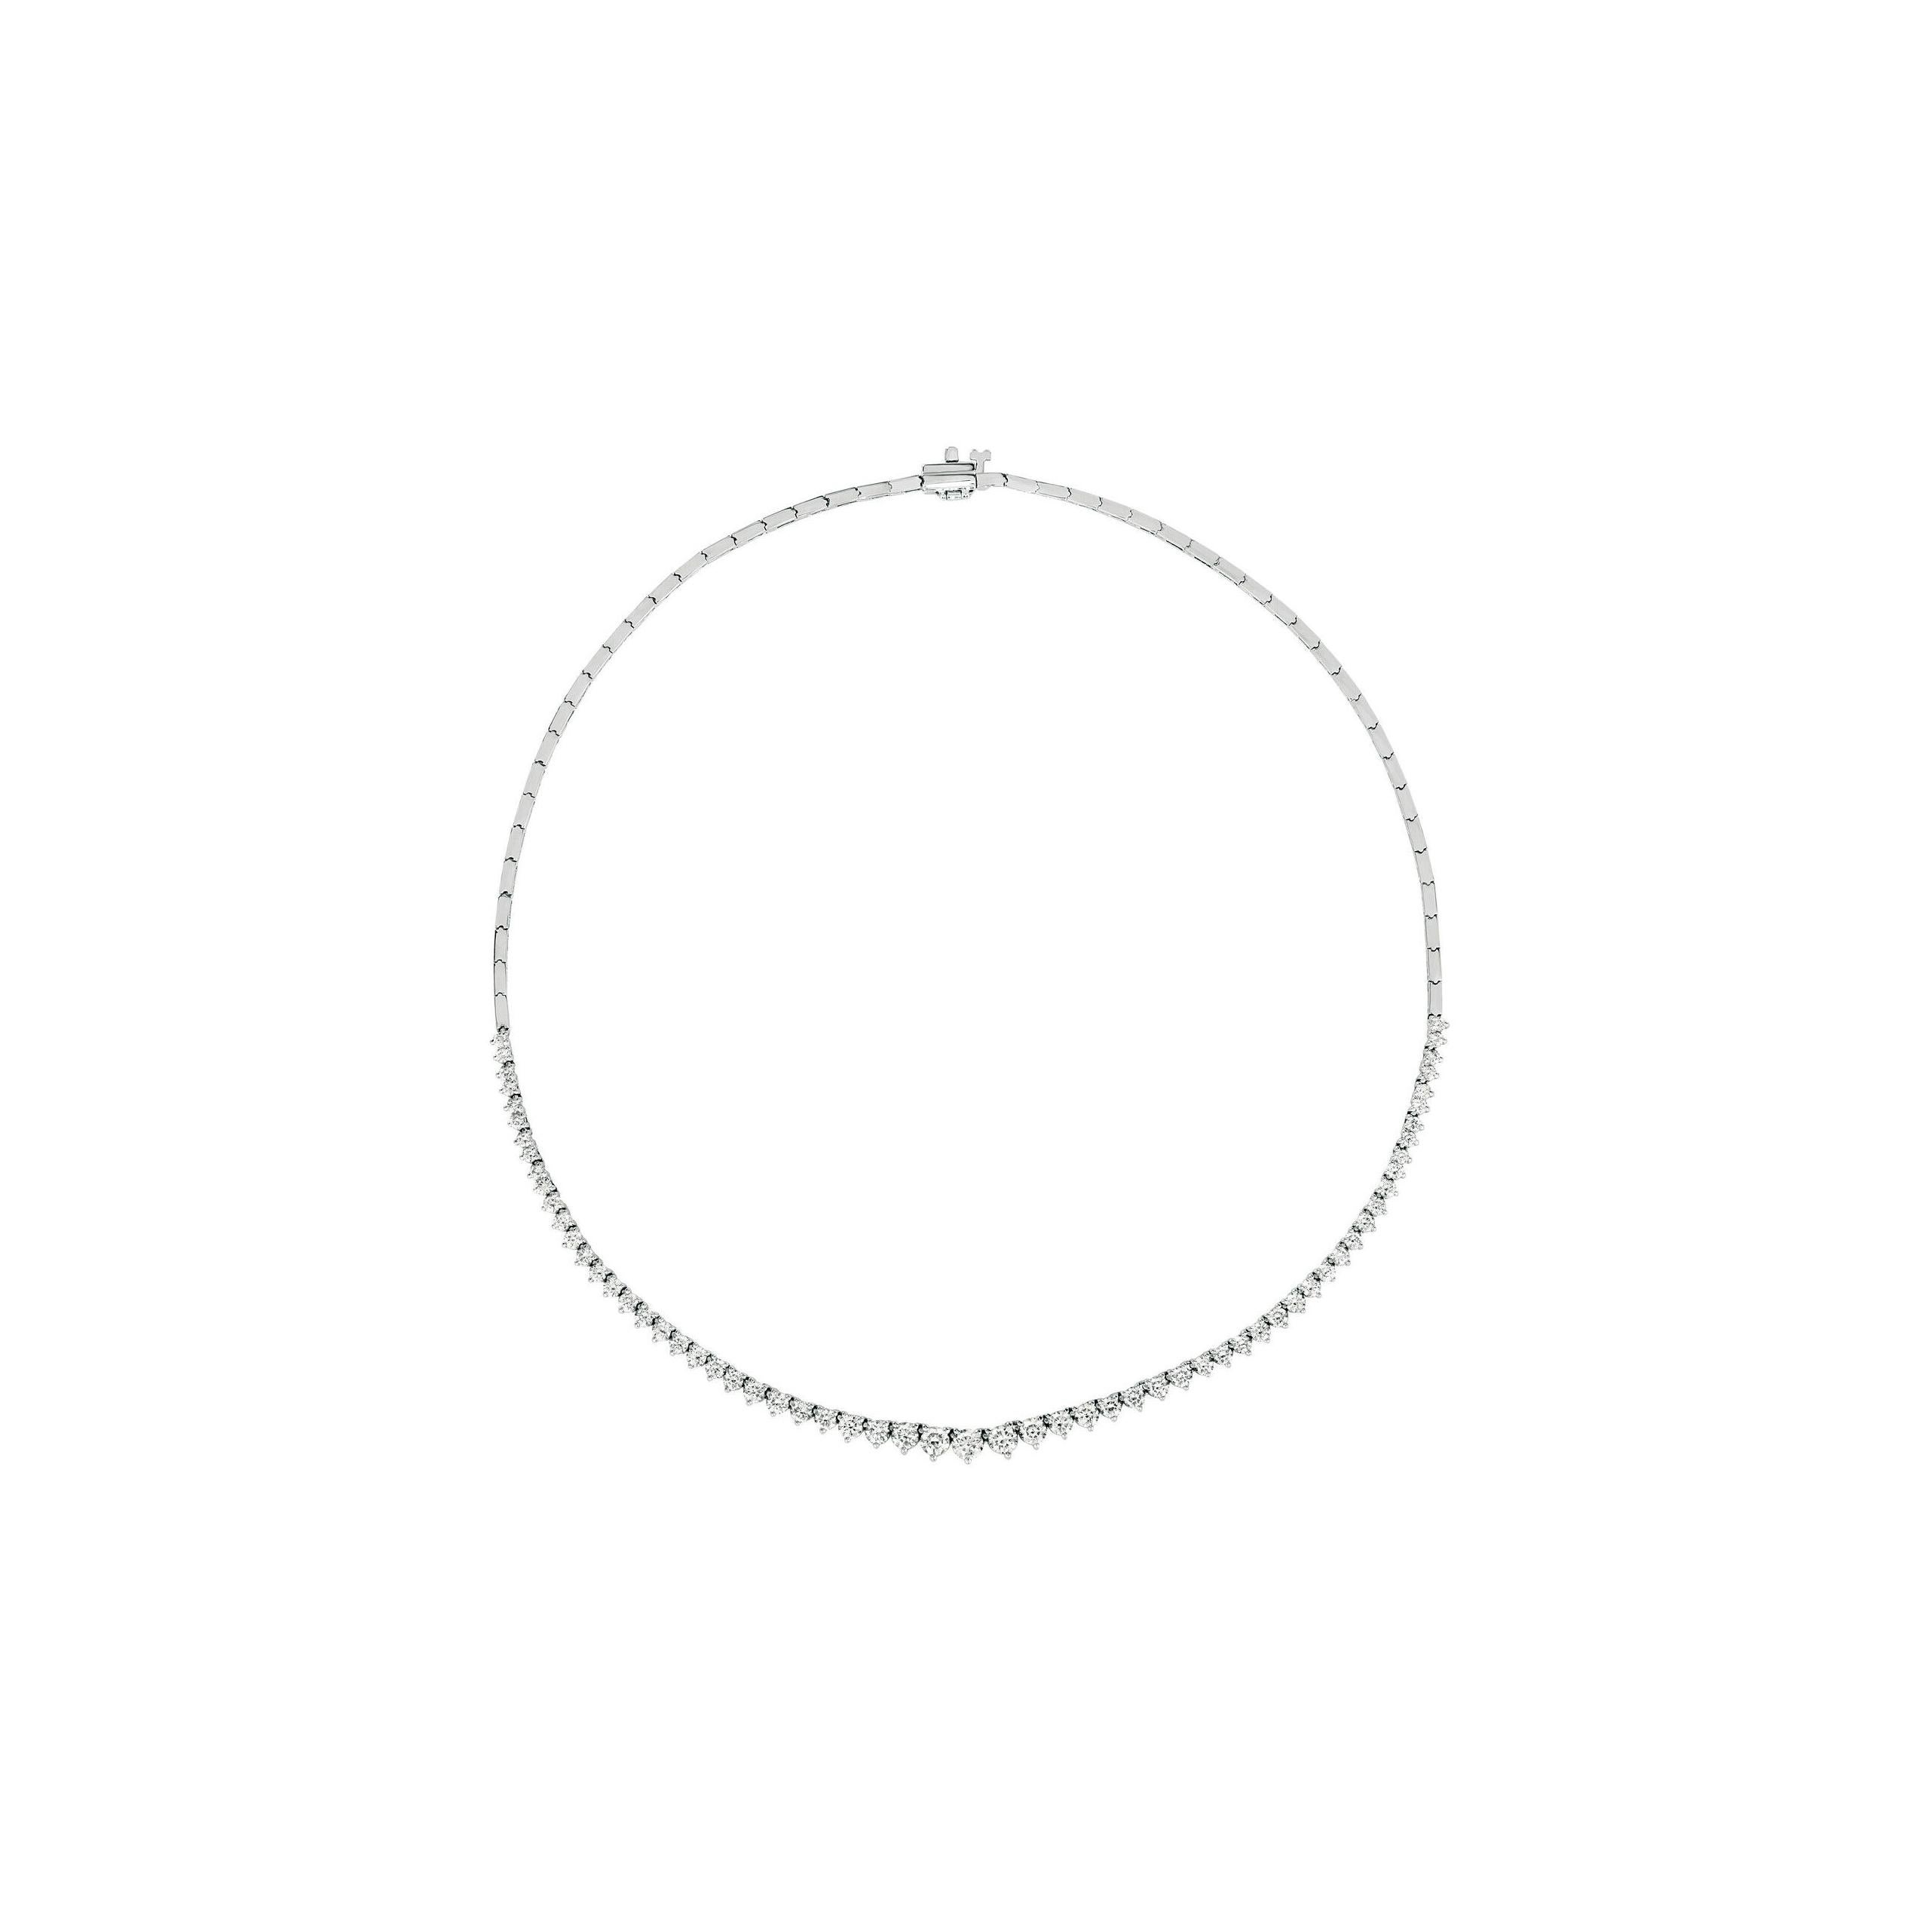 2.15 Carat Natural Diamond 3 Prong Necklace G SI 14K White Gold 16 inches

100% Natural Diamonds, Not Enhanced in any way
2.15CT
G-H 
SI  
14K White Gold, 3 Prong style, 14.1 gram
1/8 inch in width
61 Diamonds

N5570-2W 
ALL OUR ITEMS ARE AVAILABLE